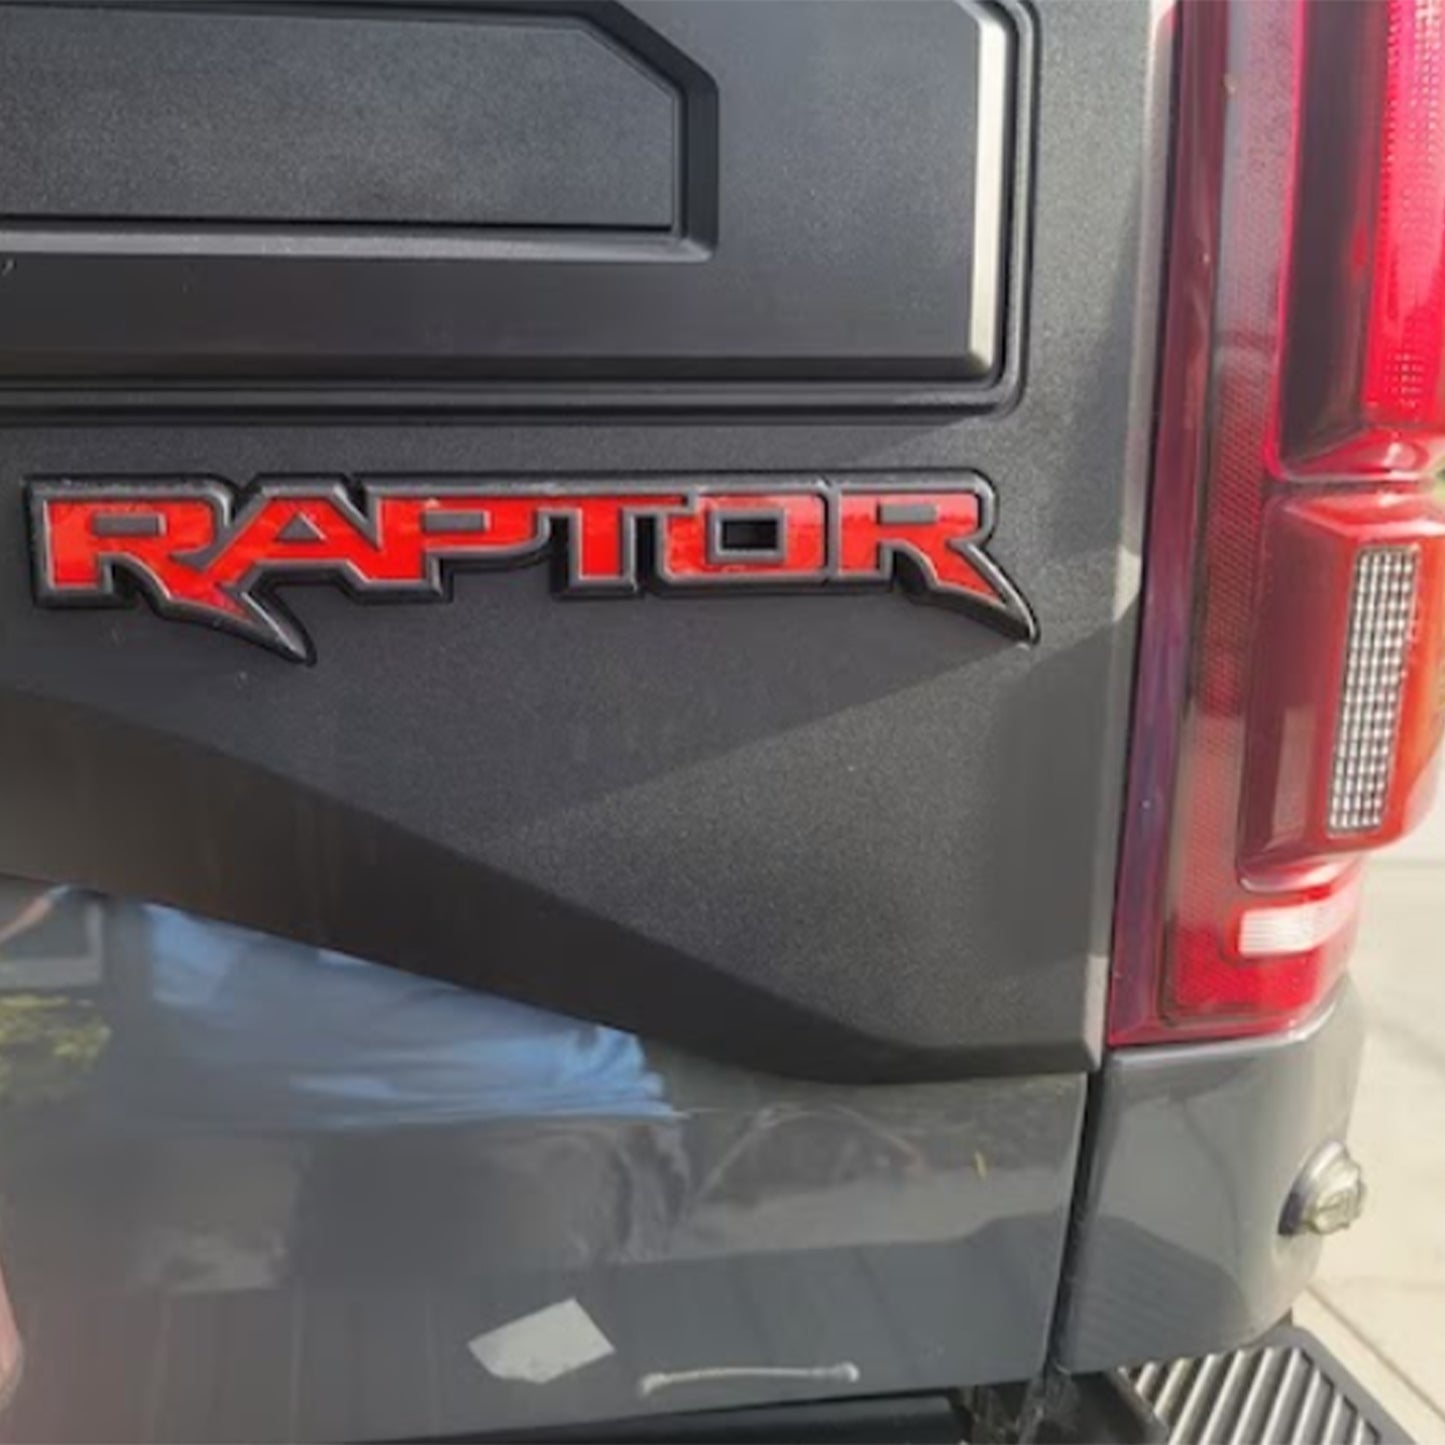 2019 Ford Raptor Tailgate Rear Emblem Inlay Vinyl Decal Stickers Panel Applique